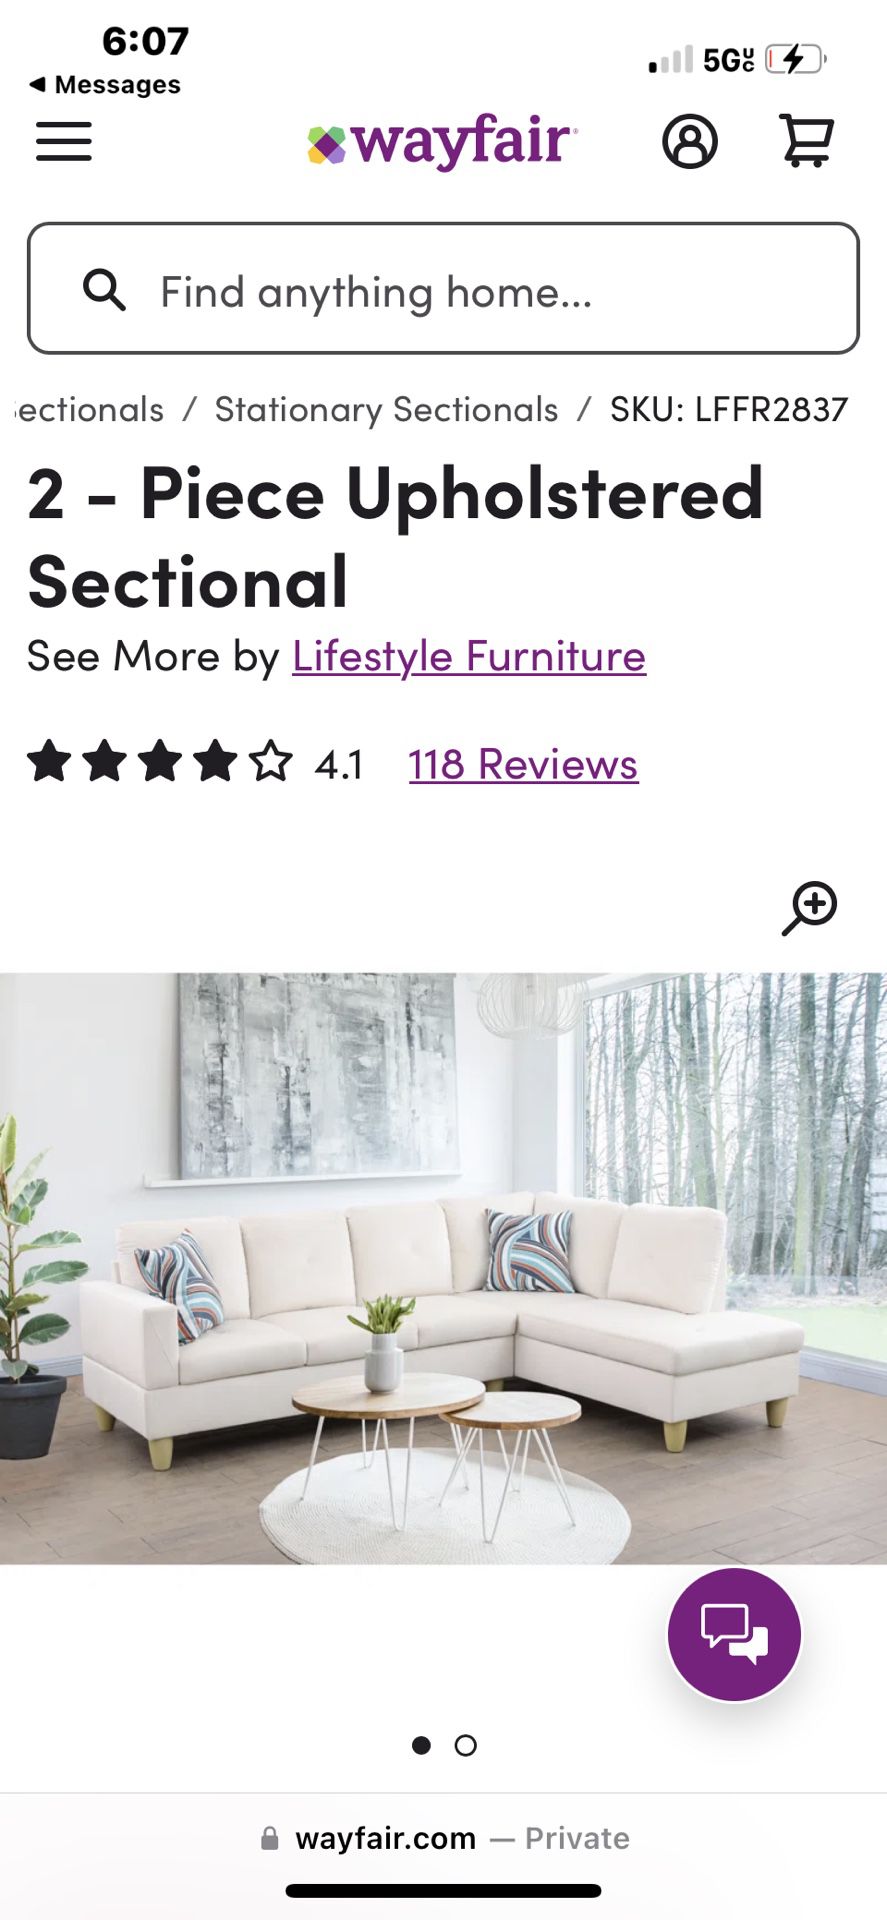 Brand New White Sectional 